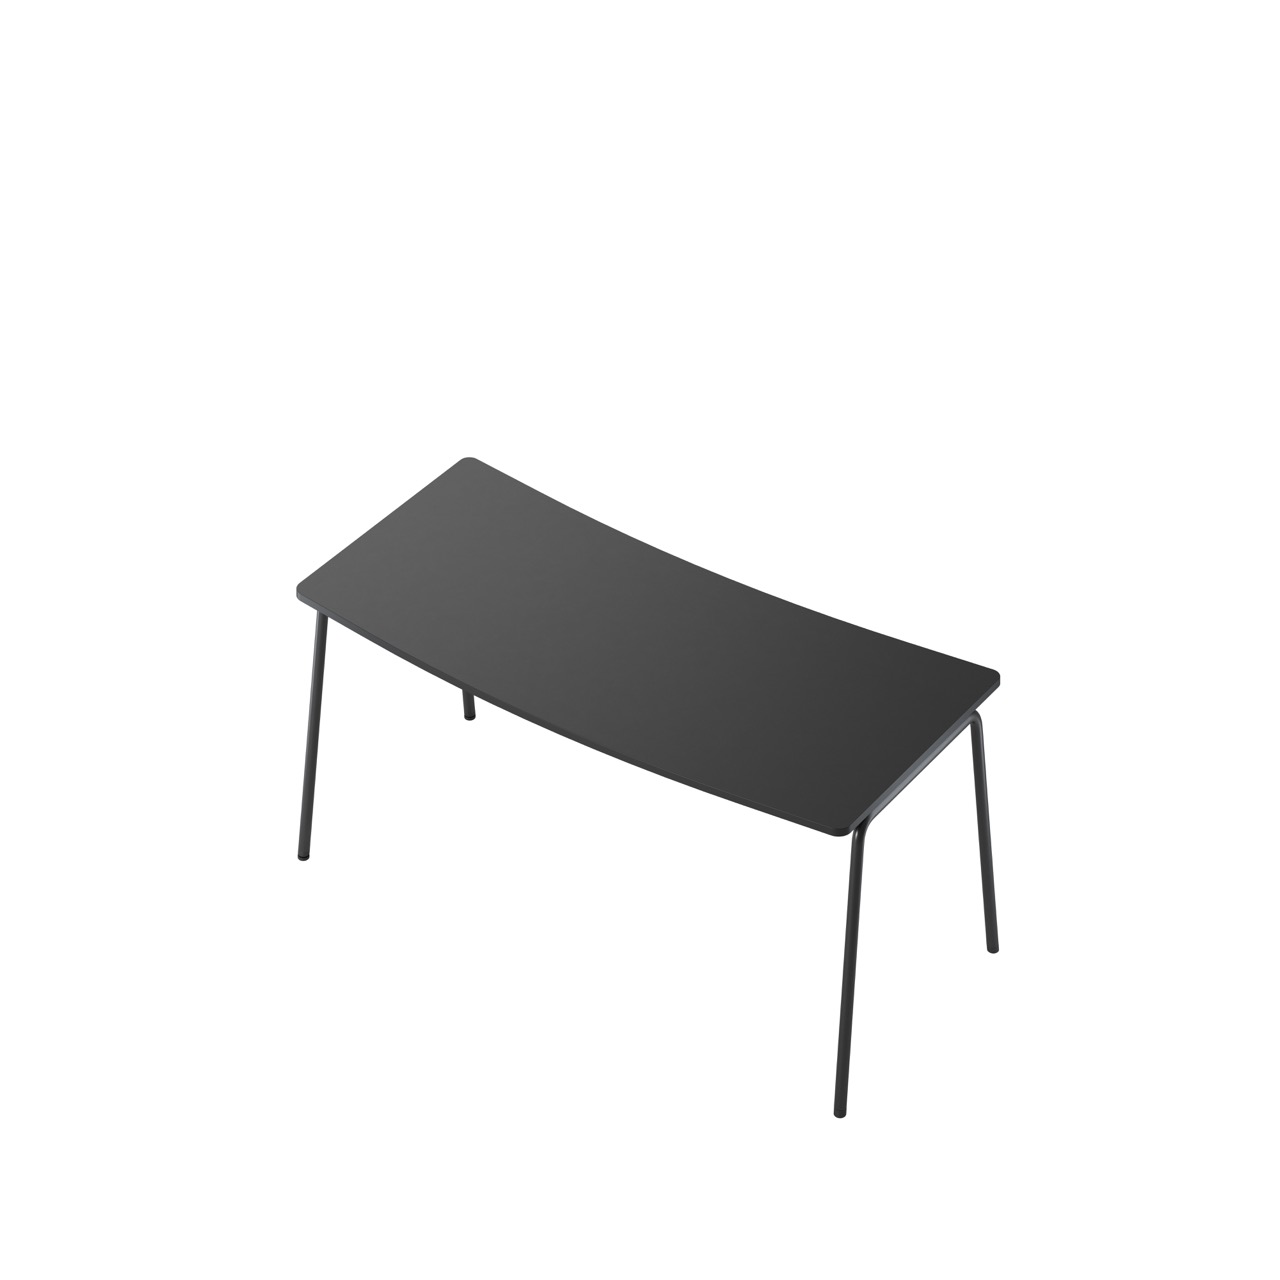 OCEE&FOUR - Tables - FourReal 74 - 180 x 80 - Angled - Packshot Image 5 Large